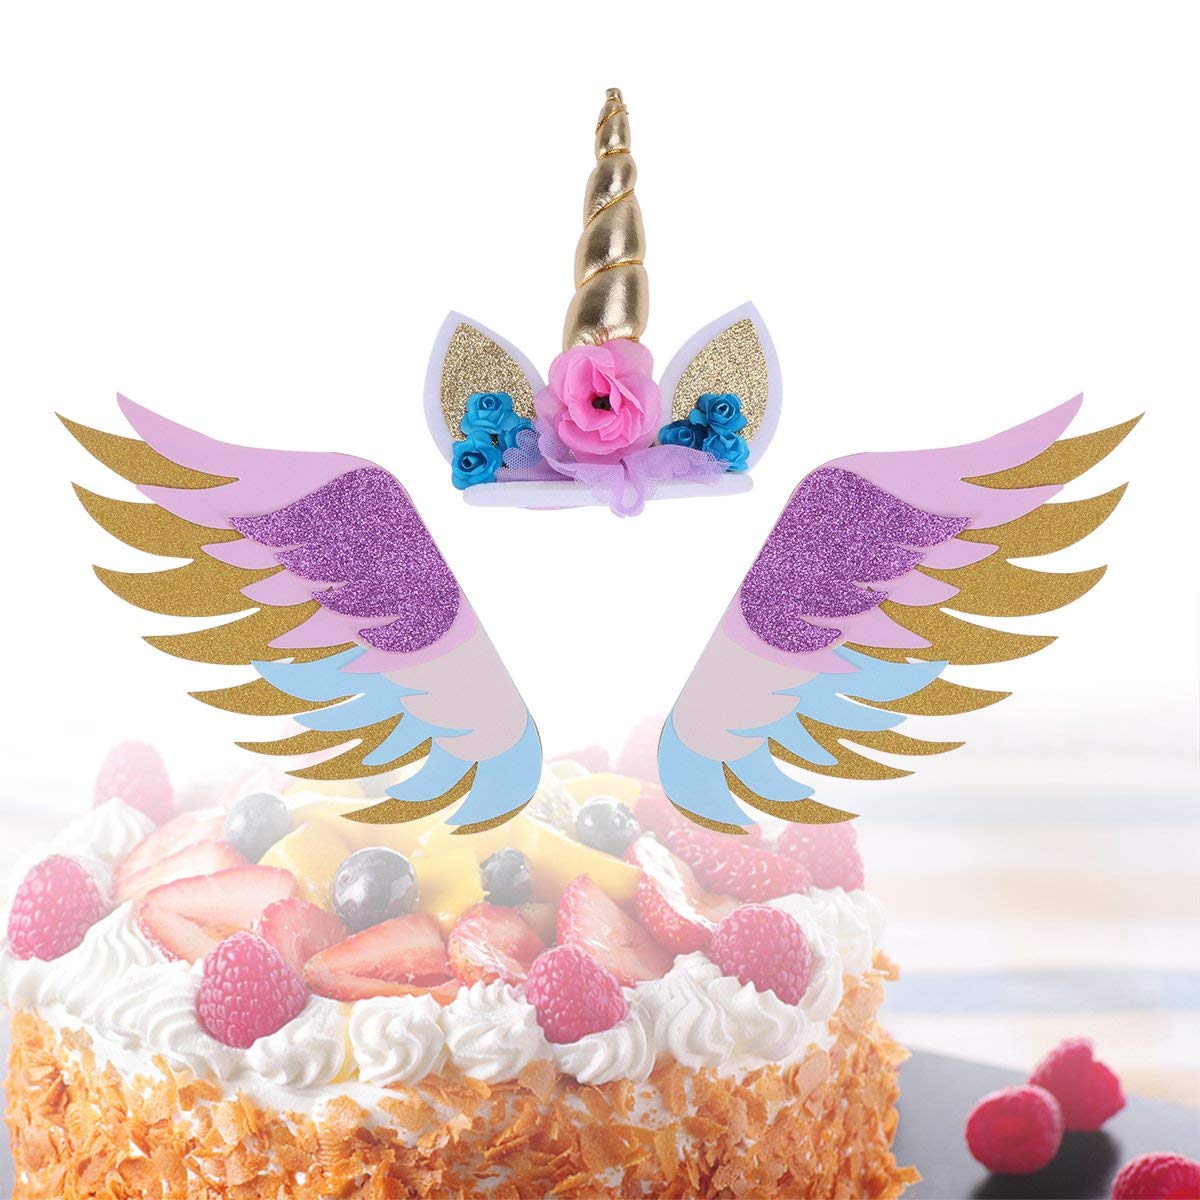 Unicorn Wings Cake Topper Glitter Paper Cake Insertion Card Cake Decoration Cupcake Toppers Birthday Baby Shower Wedding 3PCS - image 4 of 6